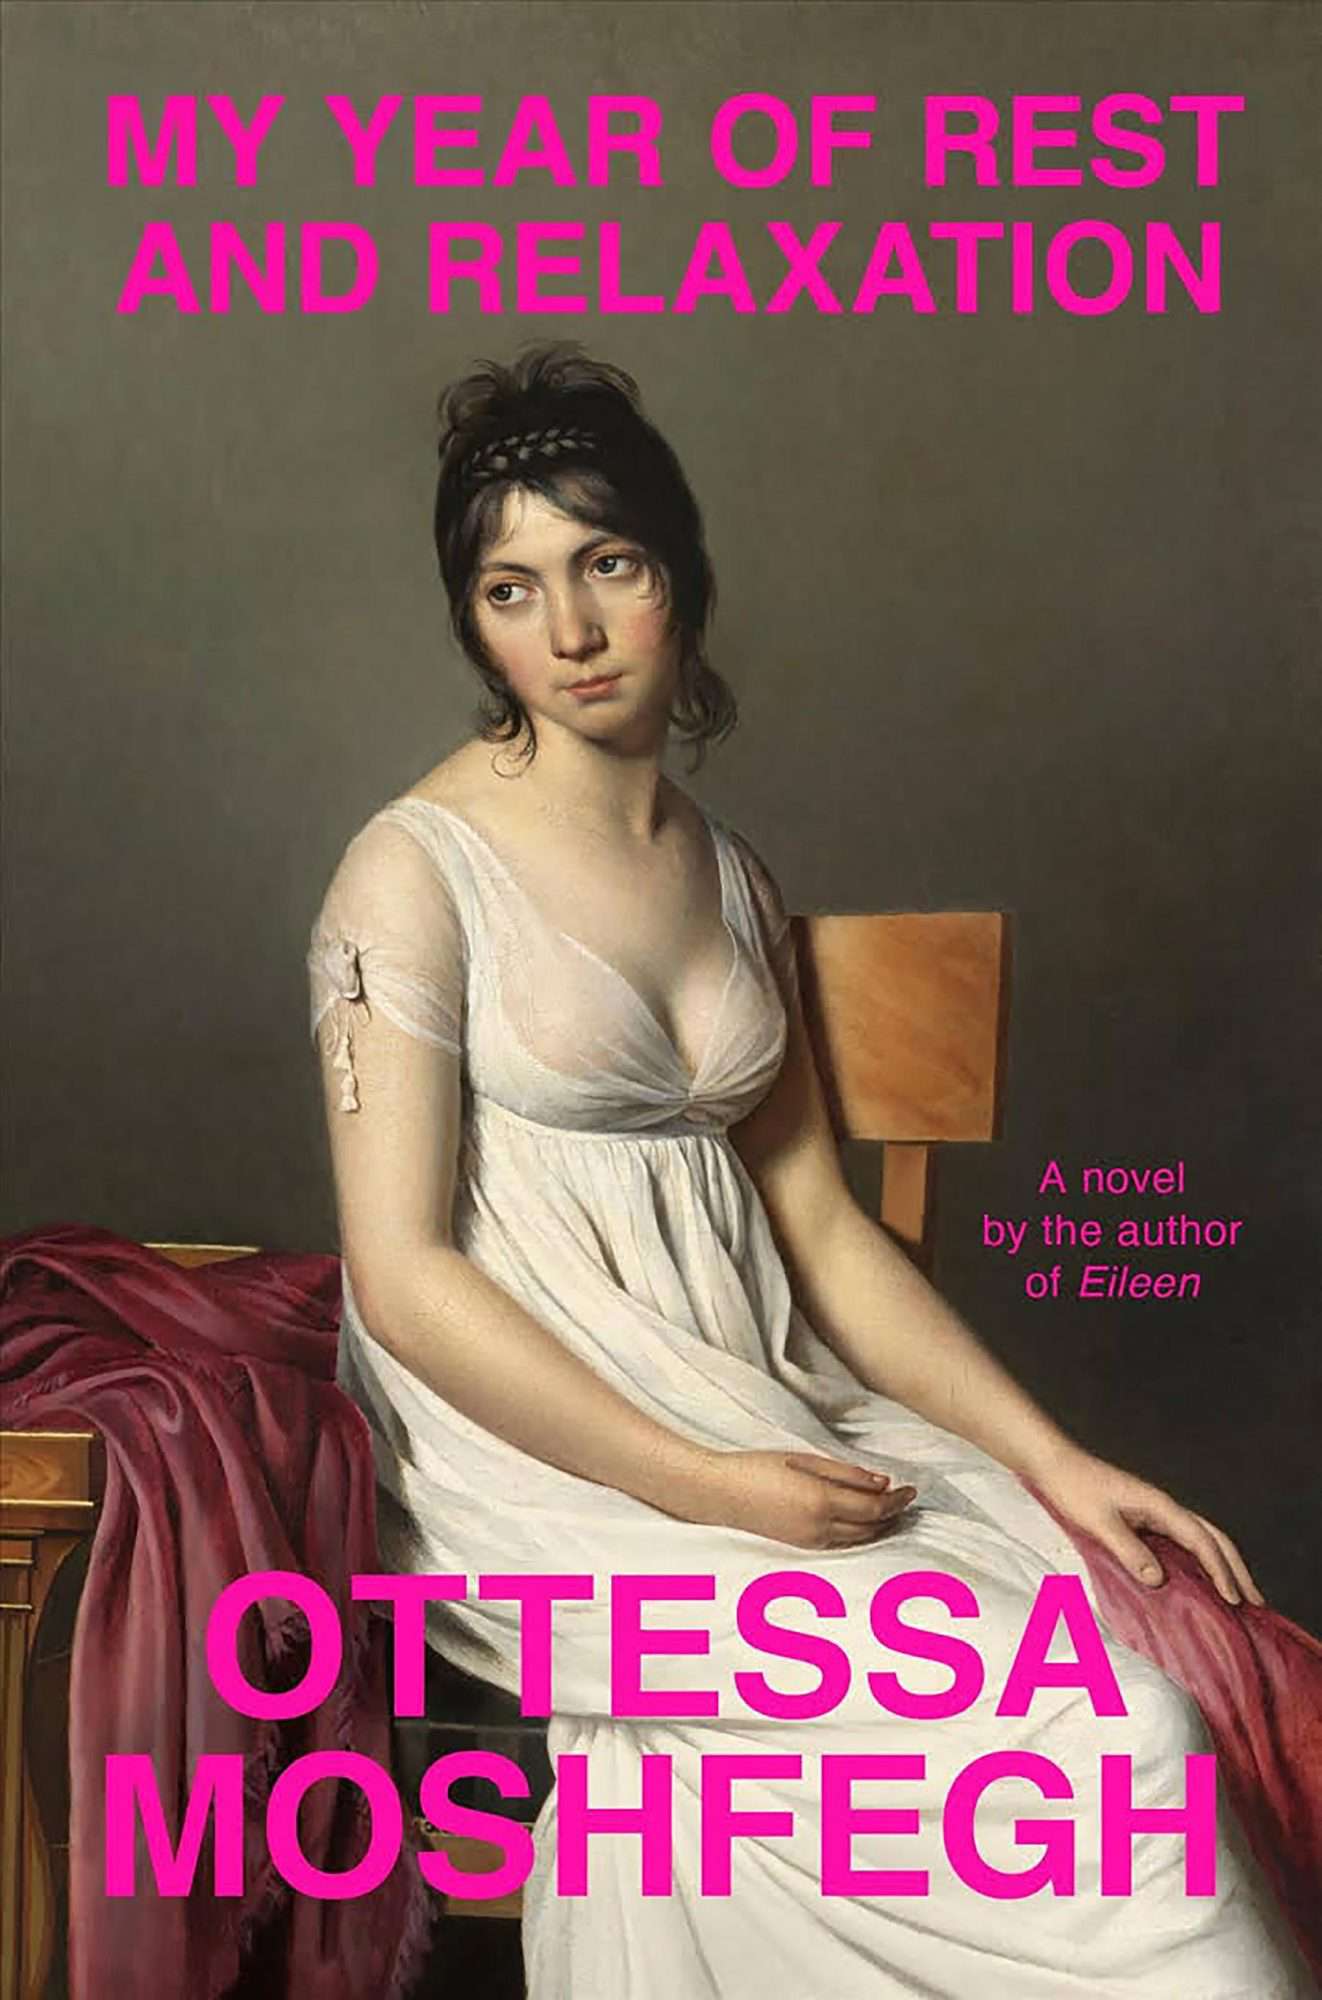 1.&nbsp;My Year of Rest and Relaxation, by Ottessa Moshfegh